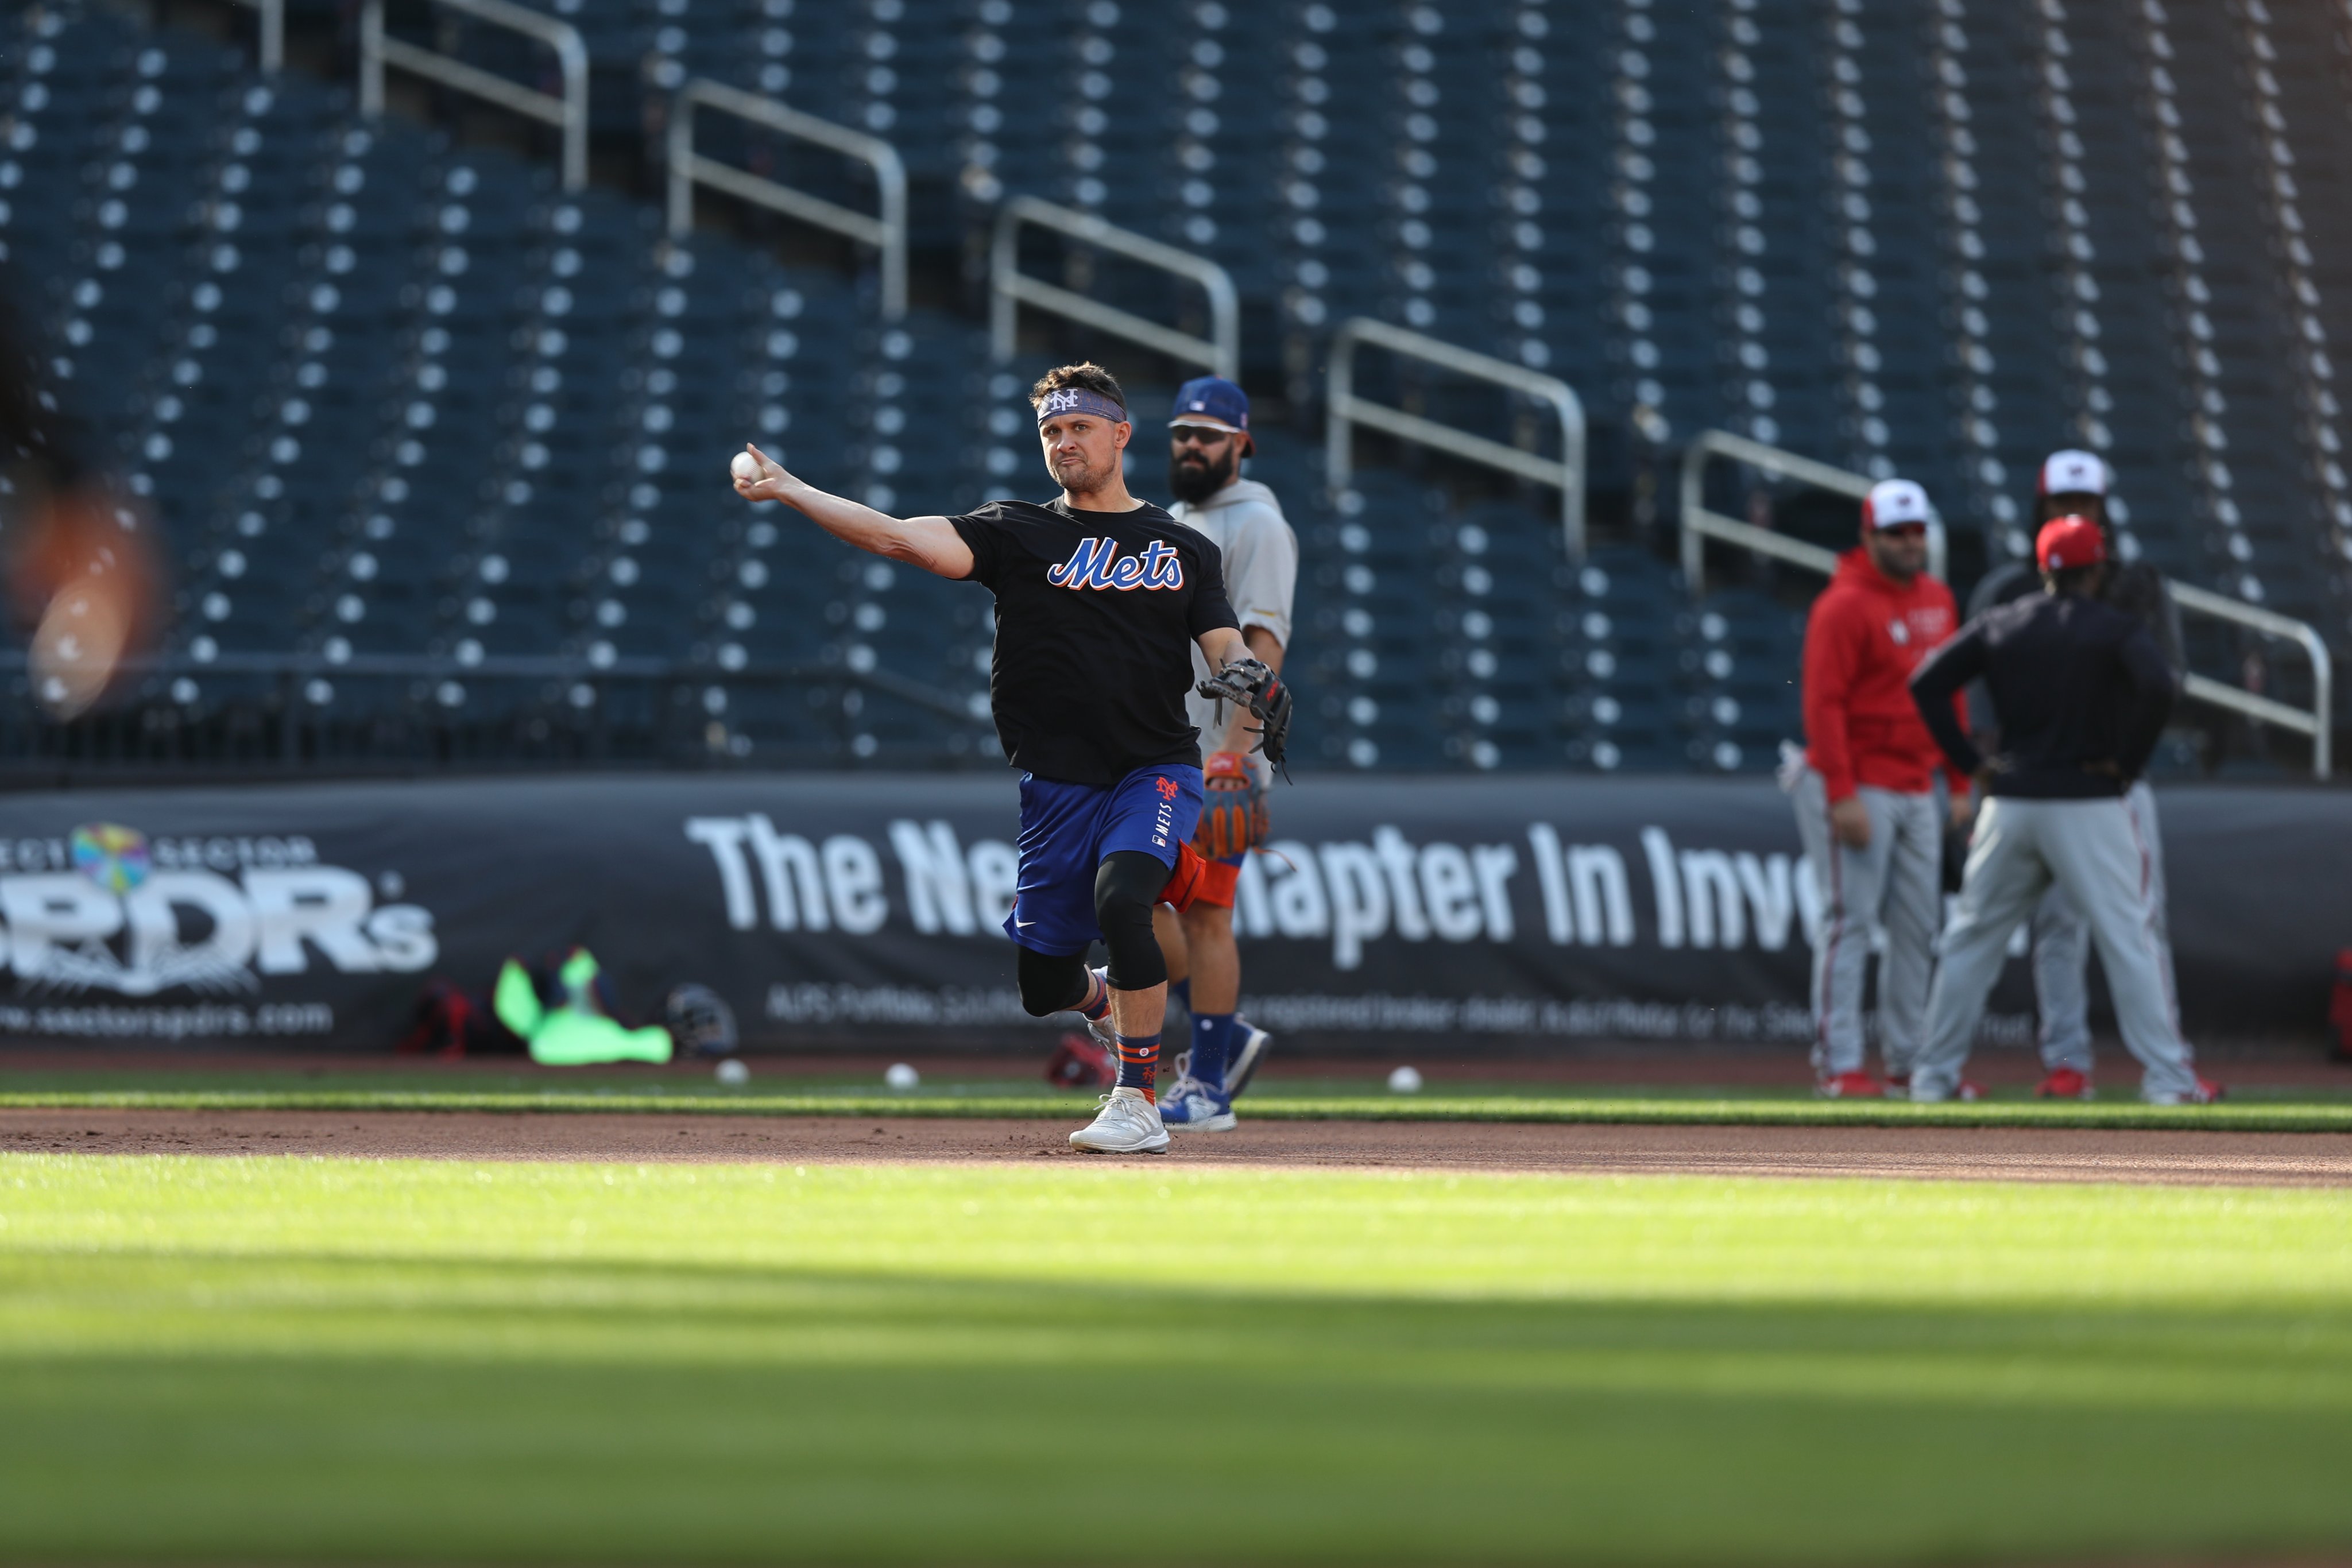 New York Mets on X: 👀 Those warm up shirts though